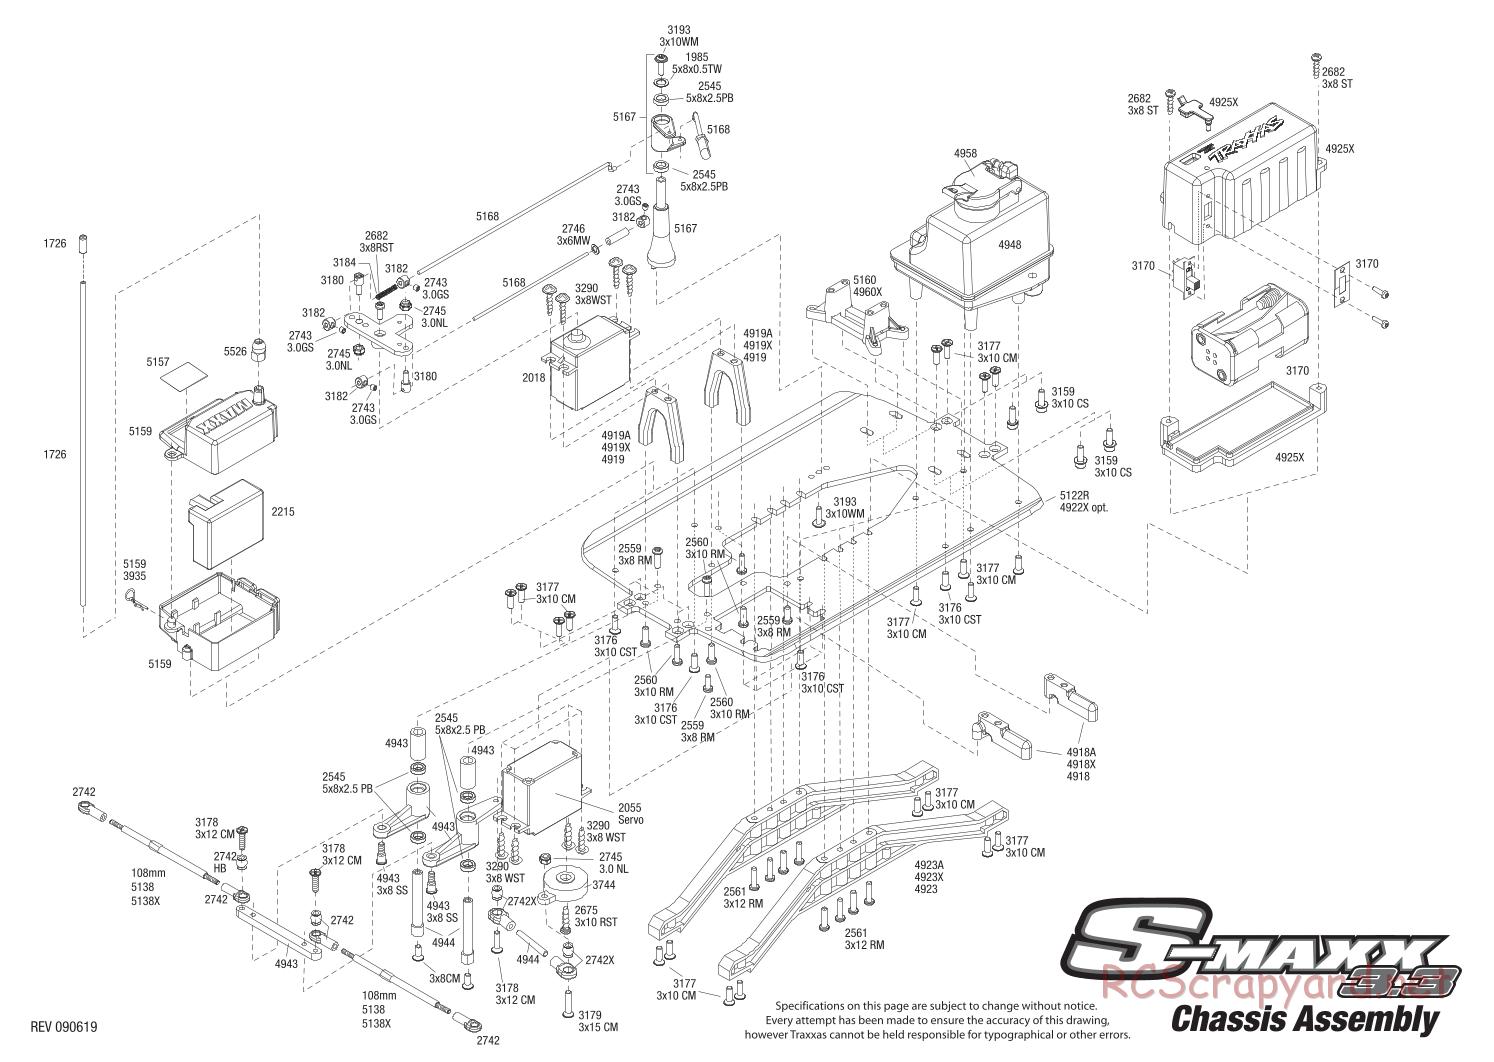 Traxxas - S-Maxx 3.3 (2009) - Exploded Views - Page 1